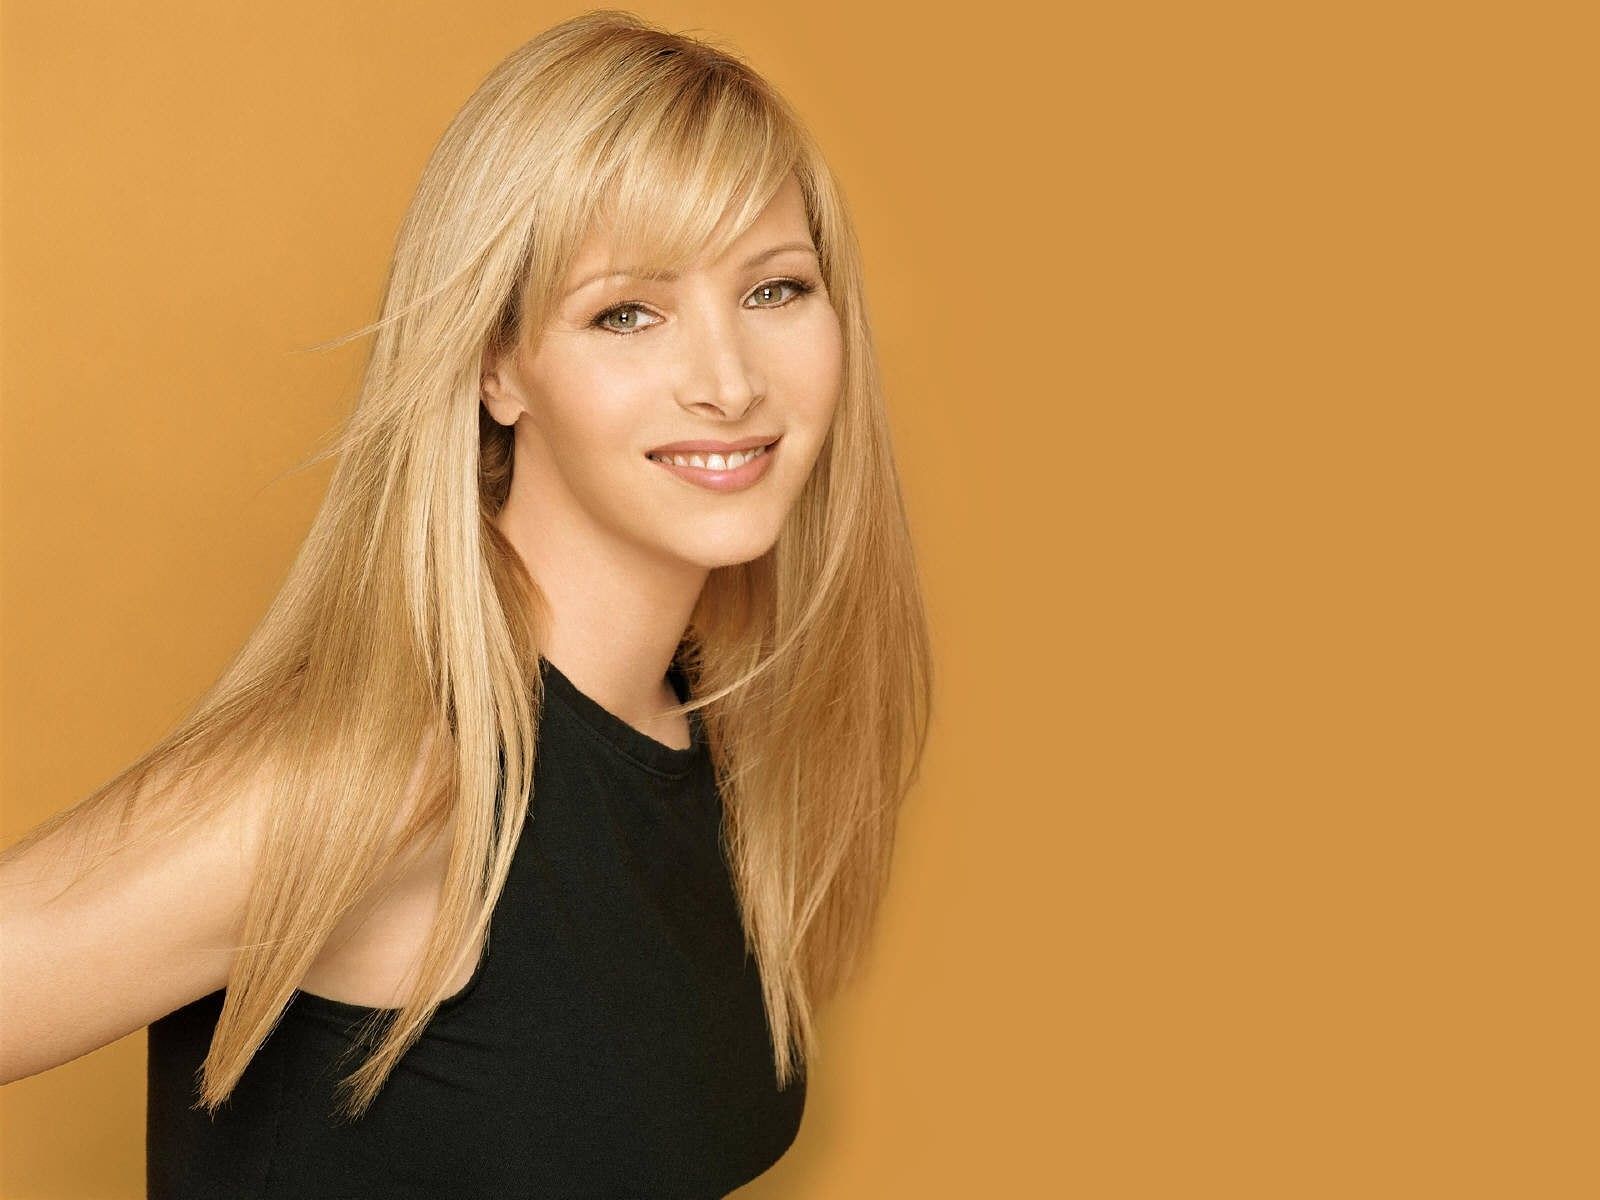 15 Important Life Lessons We Learned From Phoebe in Friends